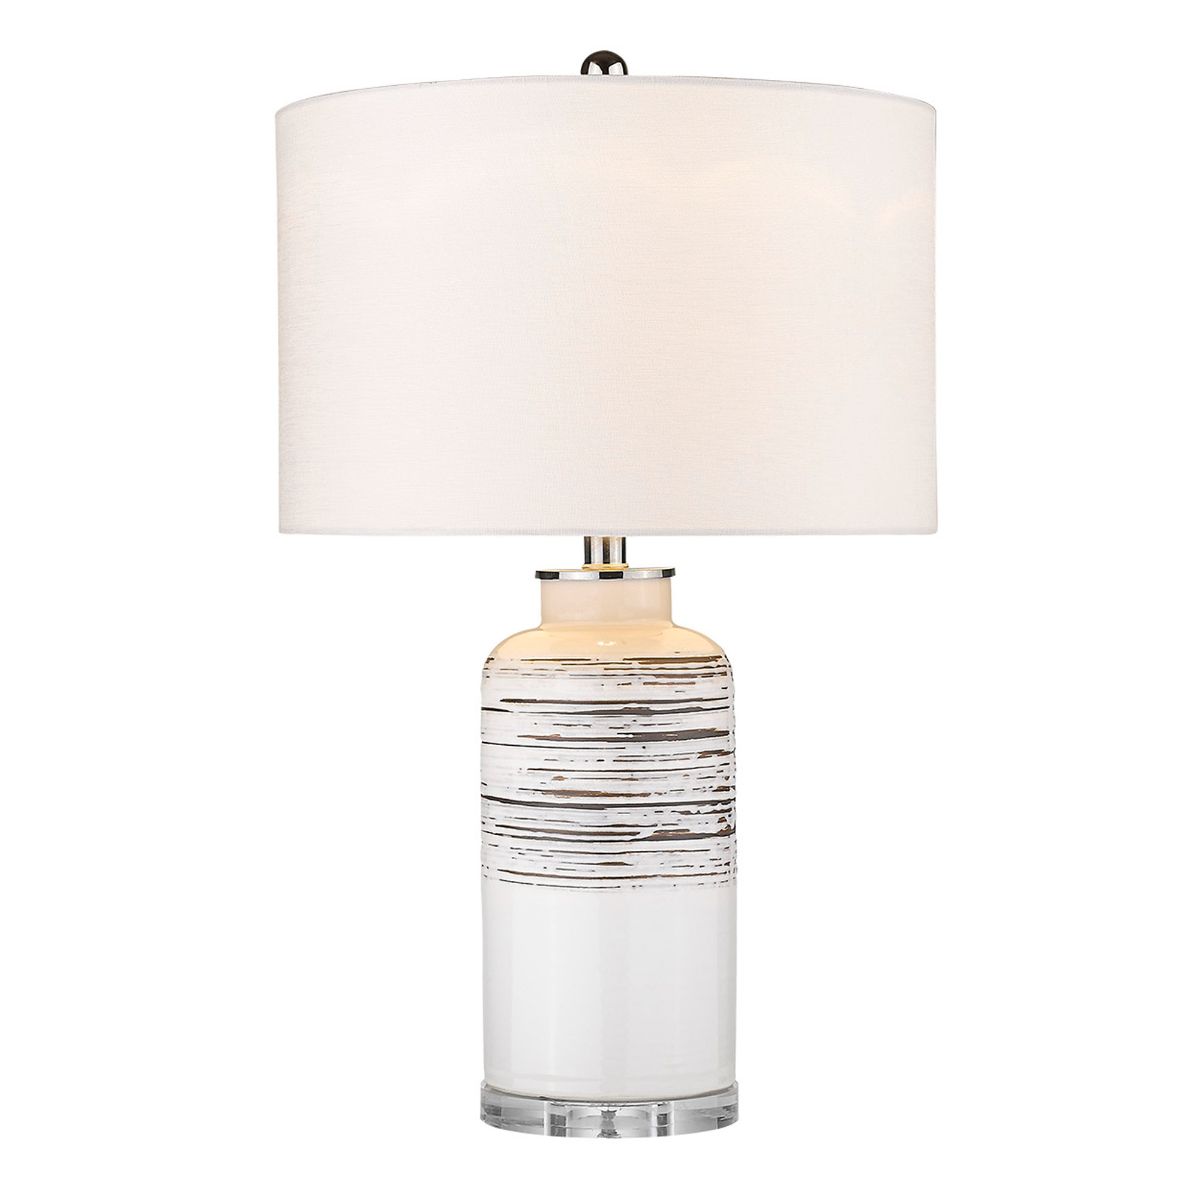 Trend Home 1 Light 25 inches Table Lamp Ceramic Body and Polished Nickel Accents